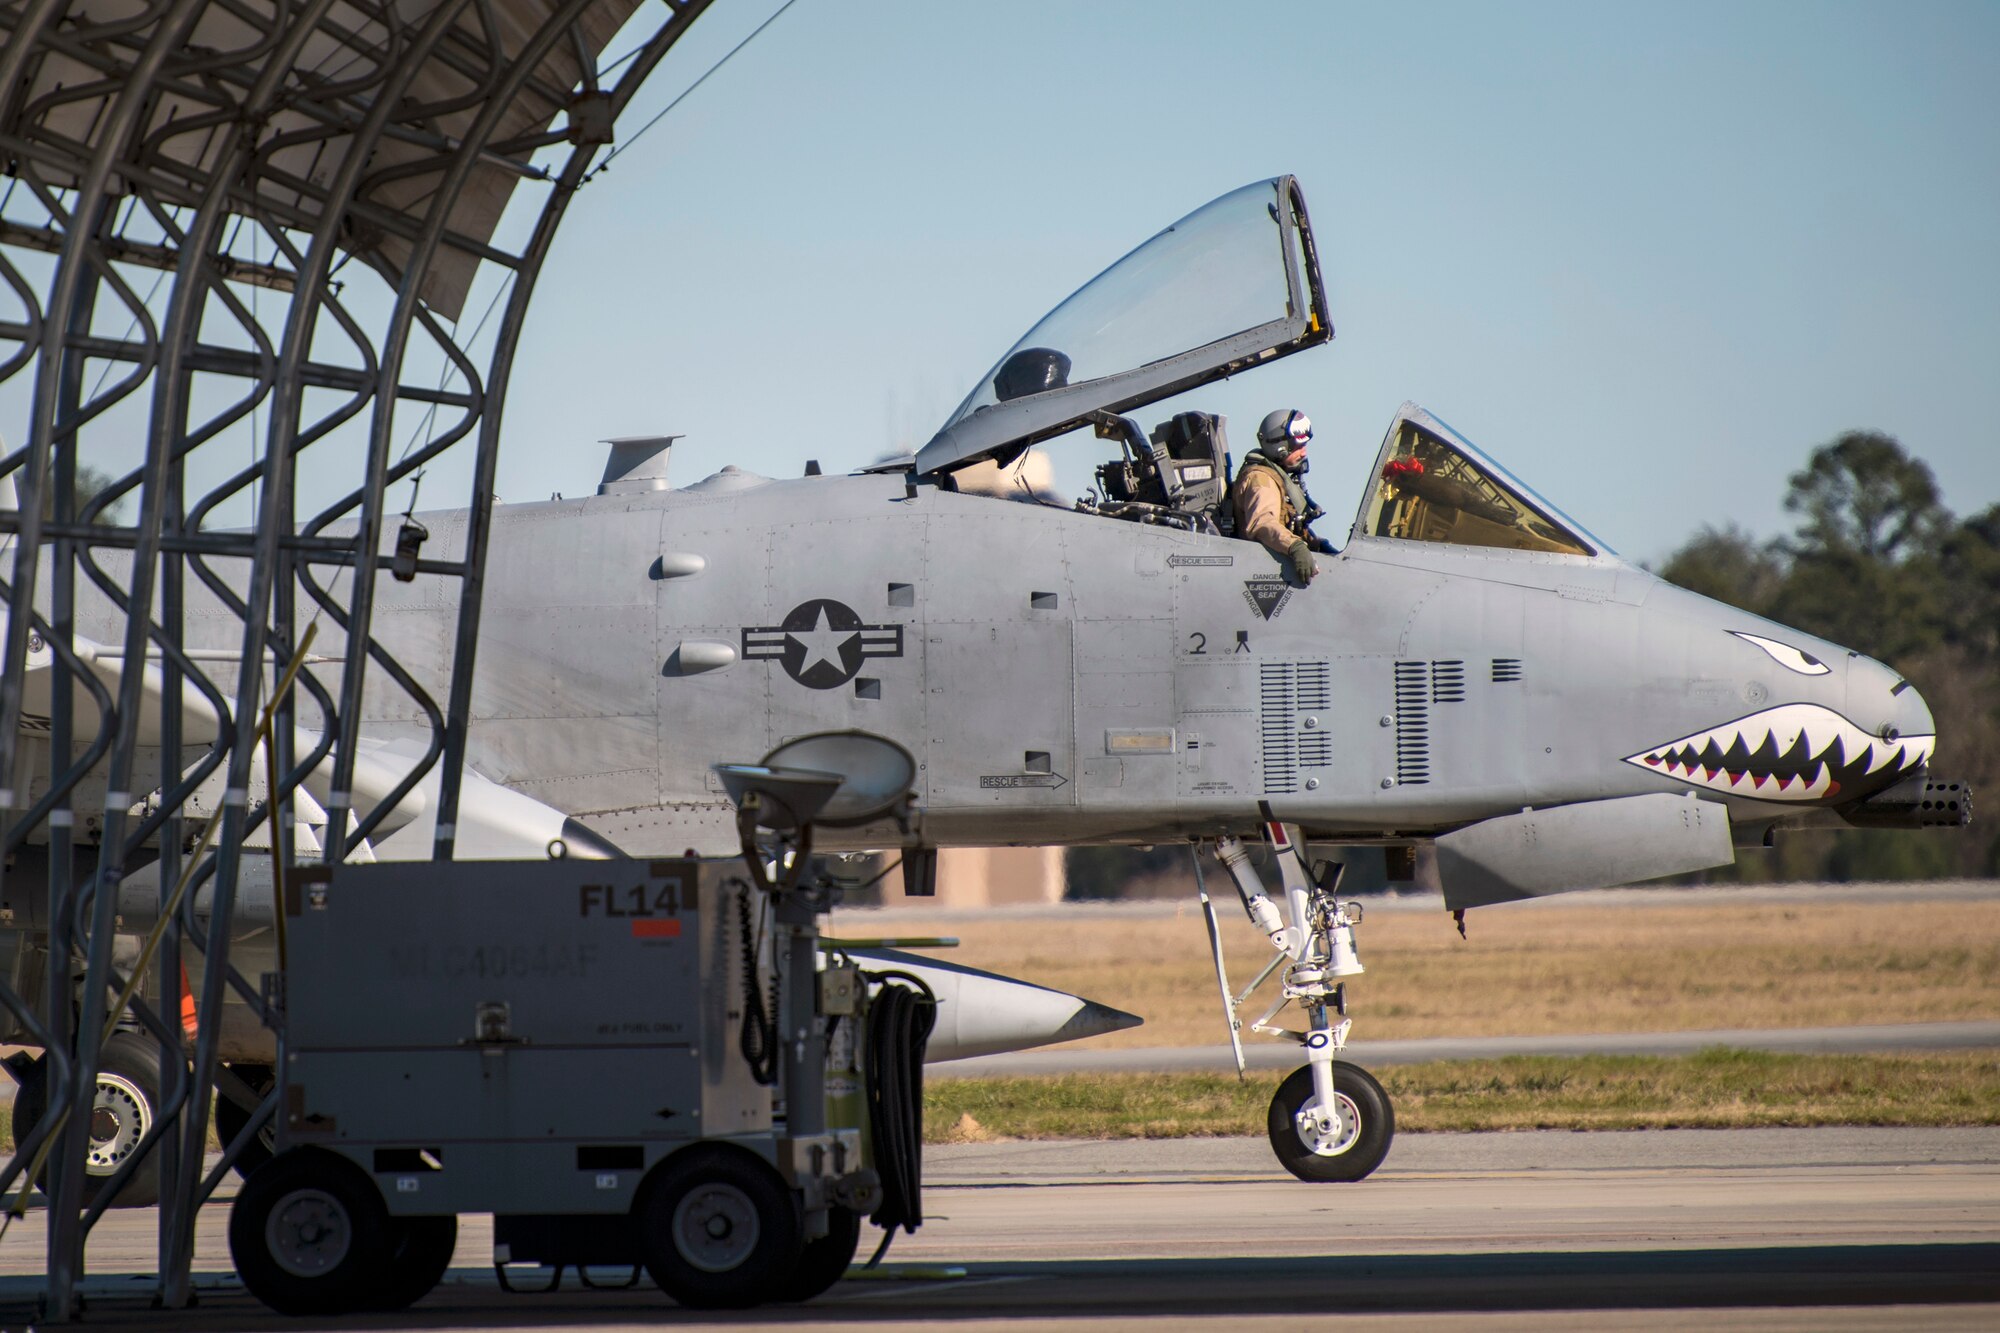 An A-10C Thunderbolt II from the 75th Fighter Squadron at Moody Air Force Base, Ga., returns from supporting Operation Freedom’s Sentinel, Jan. 25, 2019. The A-10C Thunderbolt II, which has an increased loiter time and weapons capabilities, deployed to southwest Asia in support of ground forces. (U.S. Air Force photo By Airman First Class Eugene Oliver)